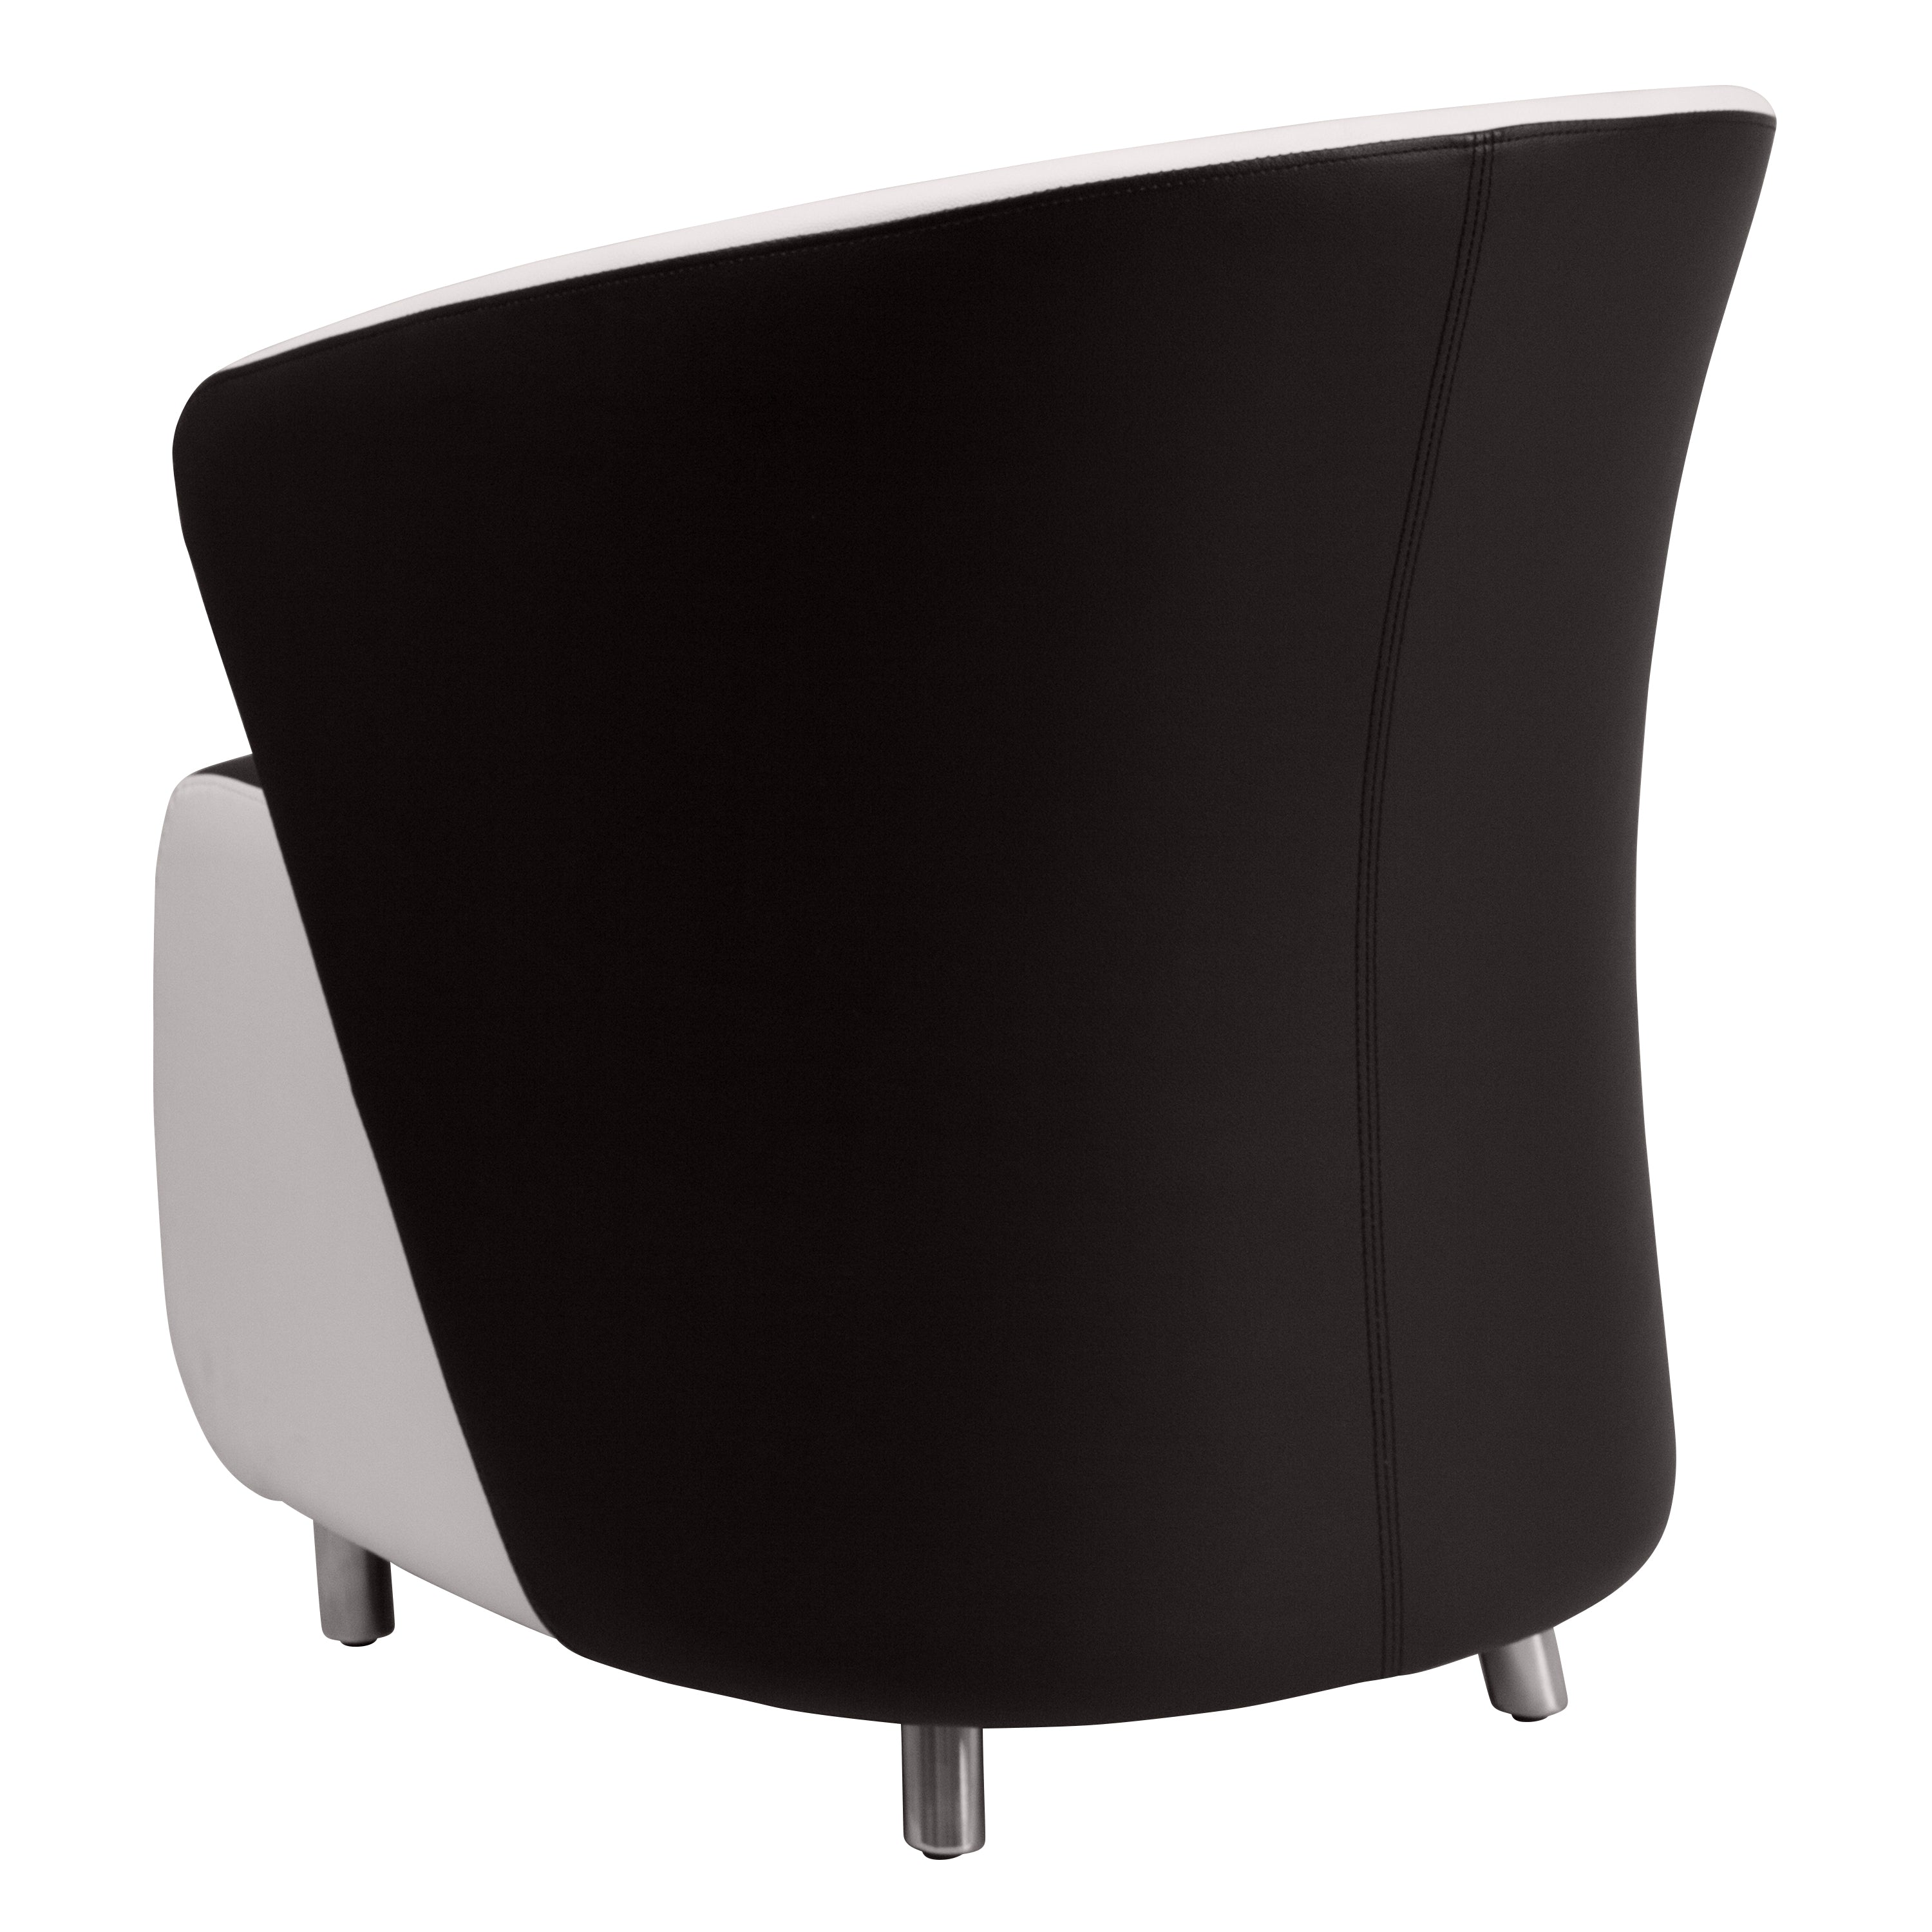 LeatherSoft Curved Barrel Back Lounge Chair-Reception Chair-Flash Furniture-Wall2Wall Furnishings